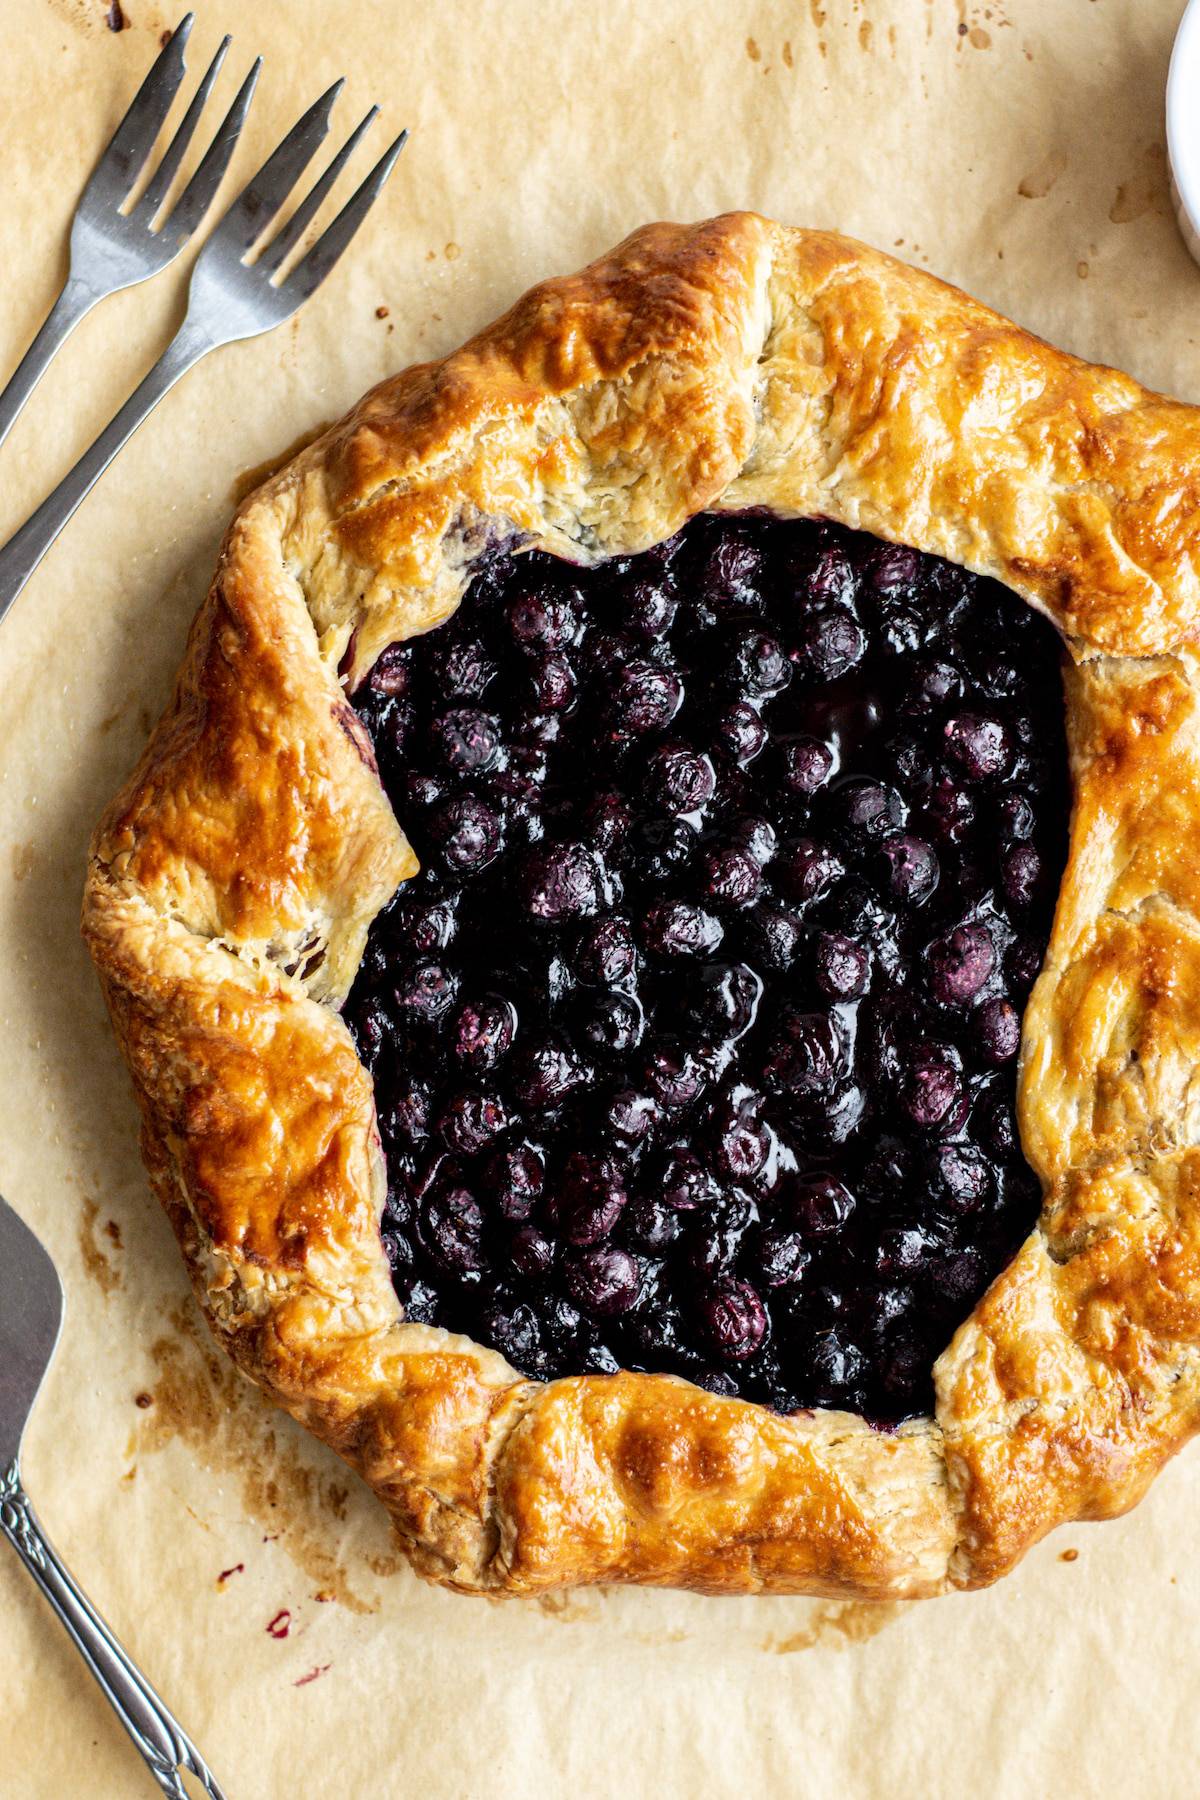 birds eye view of puff pastry blueberry galette.